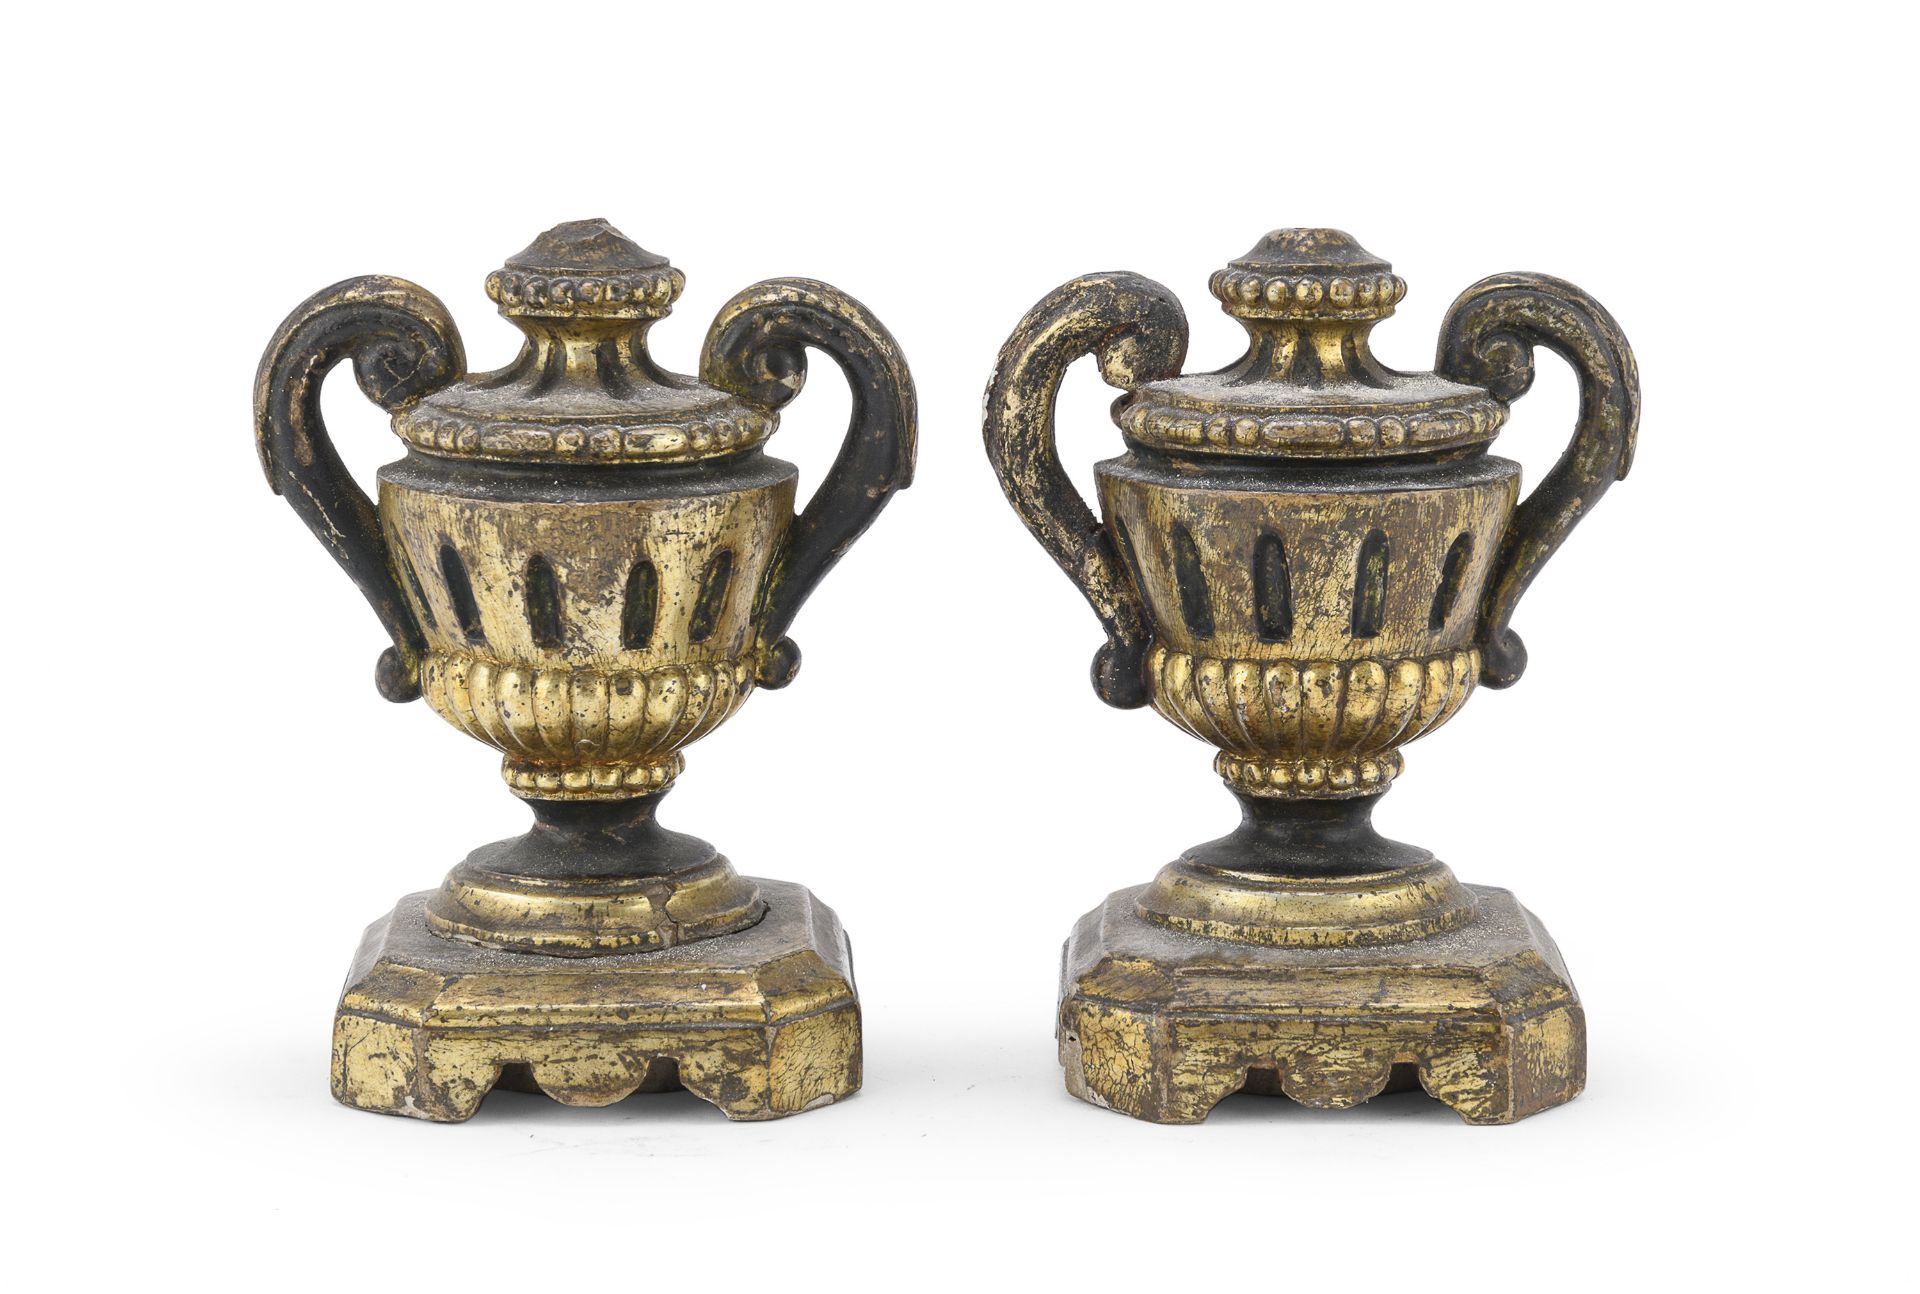 PAIR OF SMALL PORTAPALME ADAPTED TO LAMPS LATE 18TH CENTURY